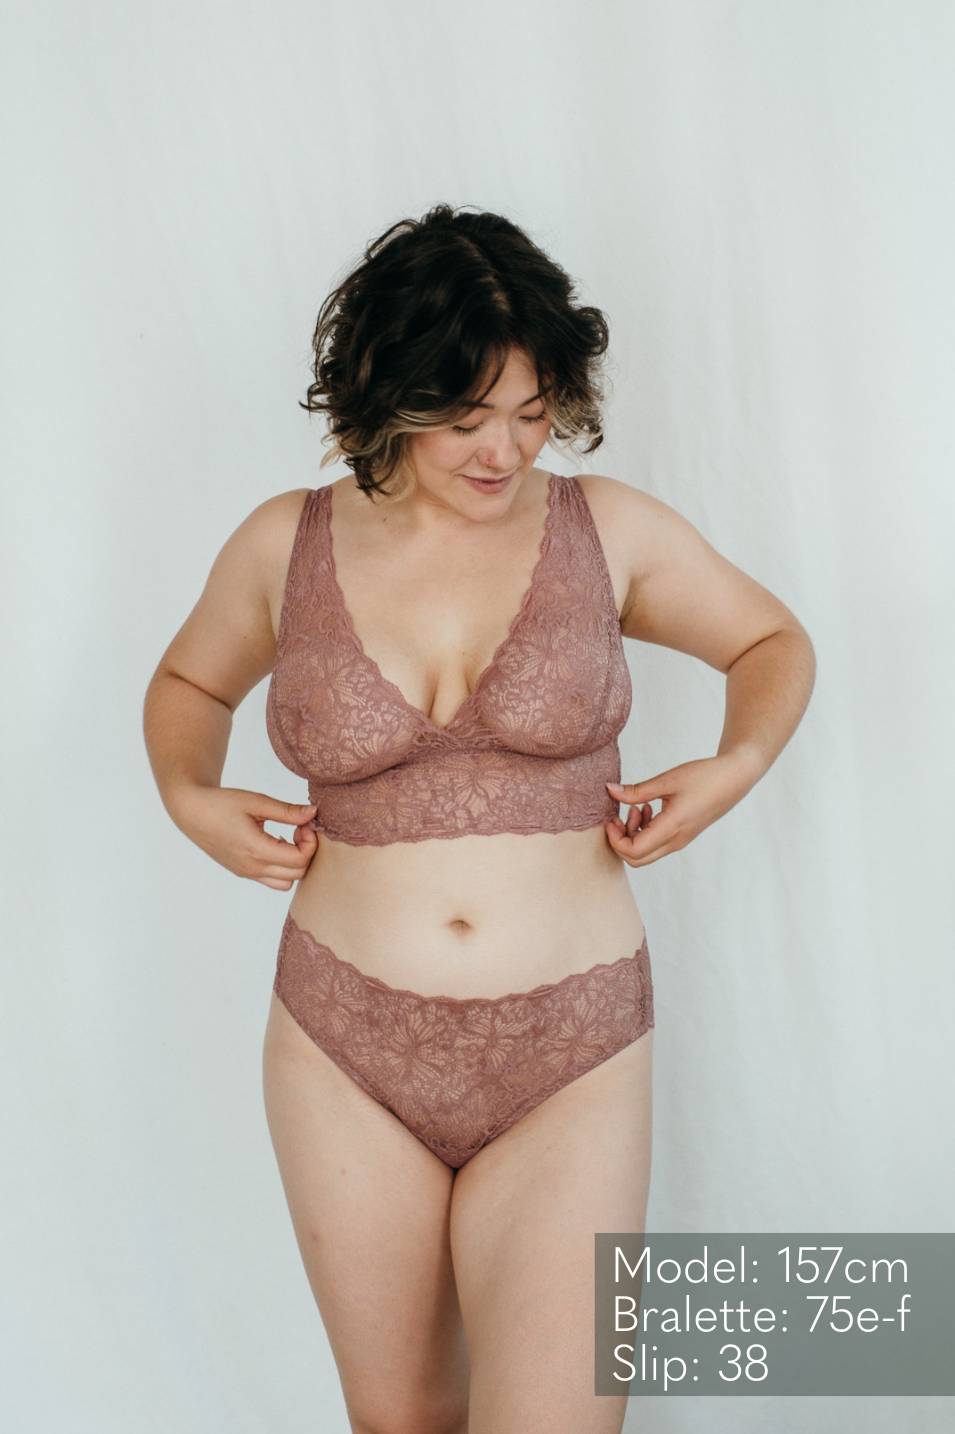 Model wears Bralette Belle in size 75 ef and the matching slip in Smockey Rose.